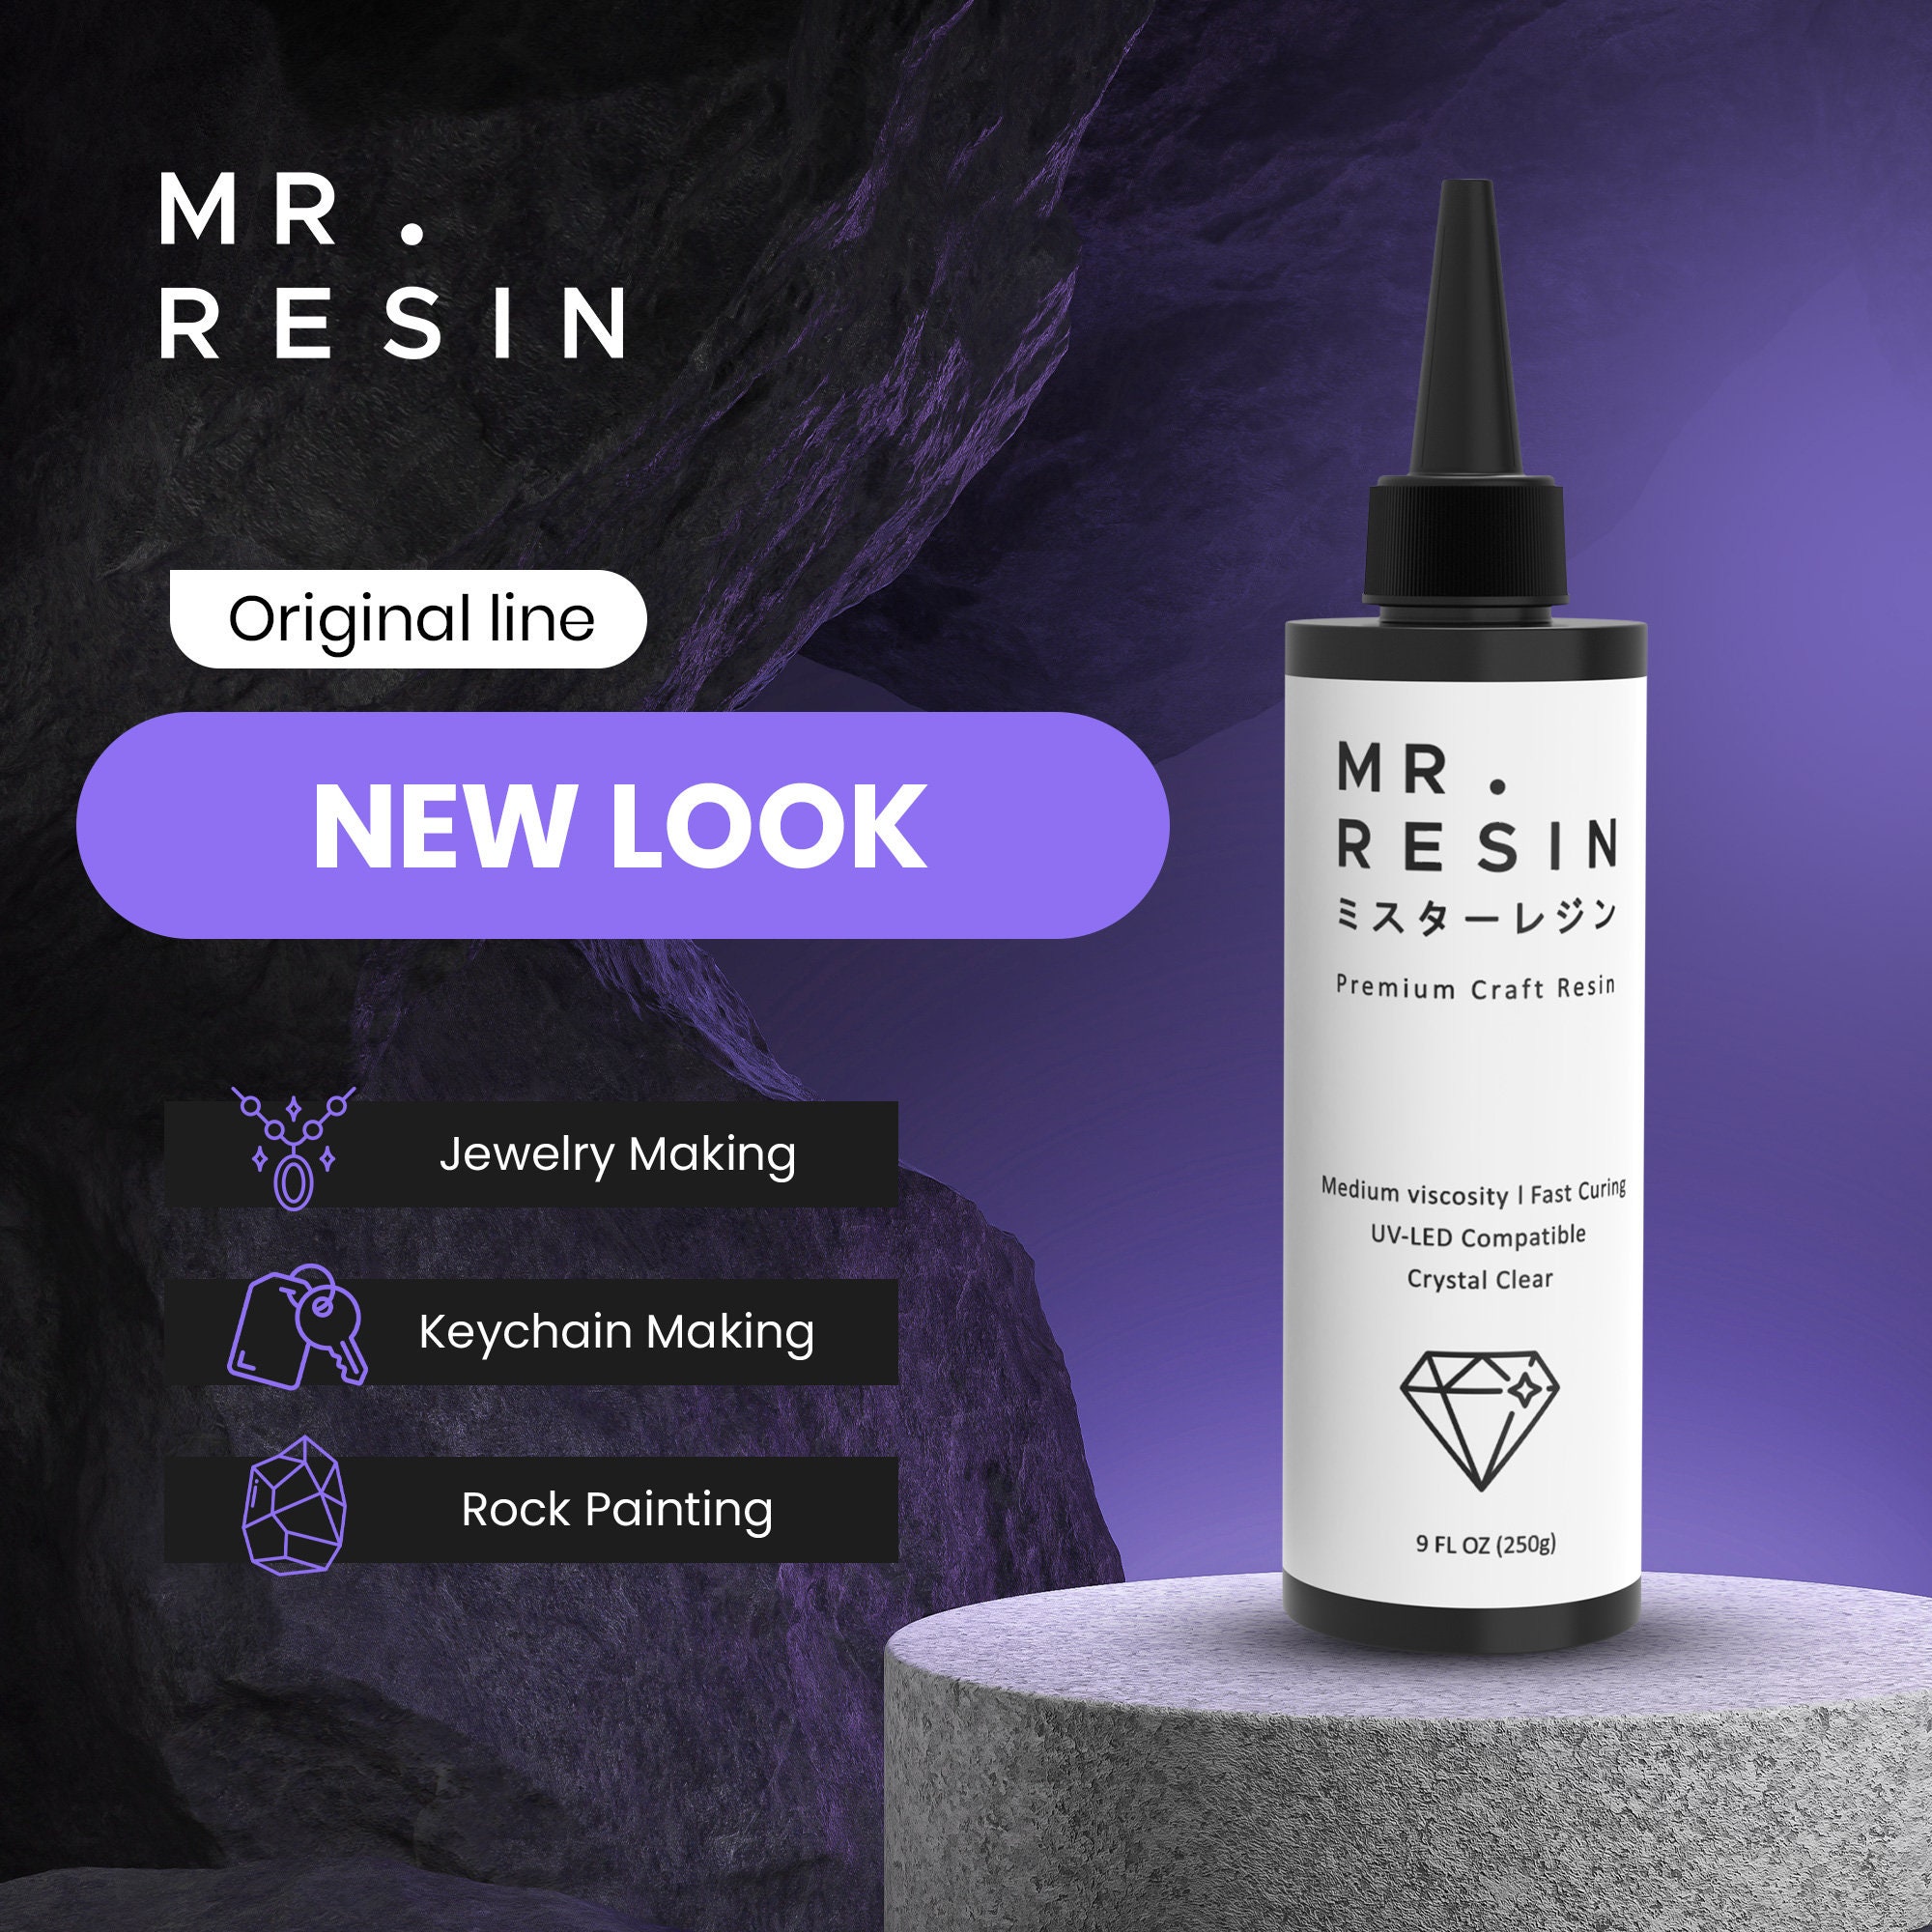 Mr.resin™ Original Craft UV Resin 17.6oz 500g Crystal Clear Hard Type UV  Resin for Jewelry Making, Rock Painting & More 